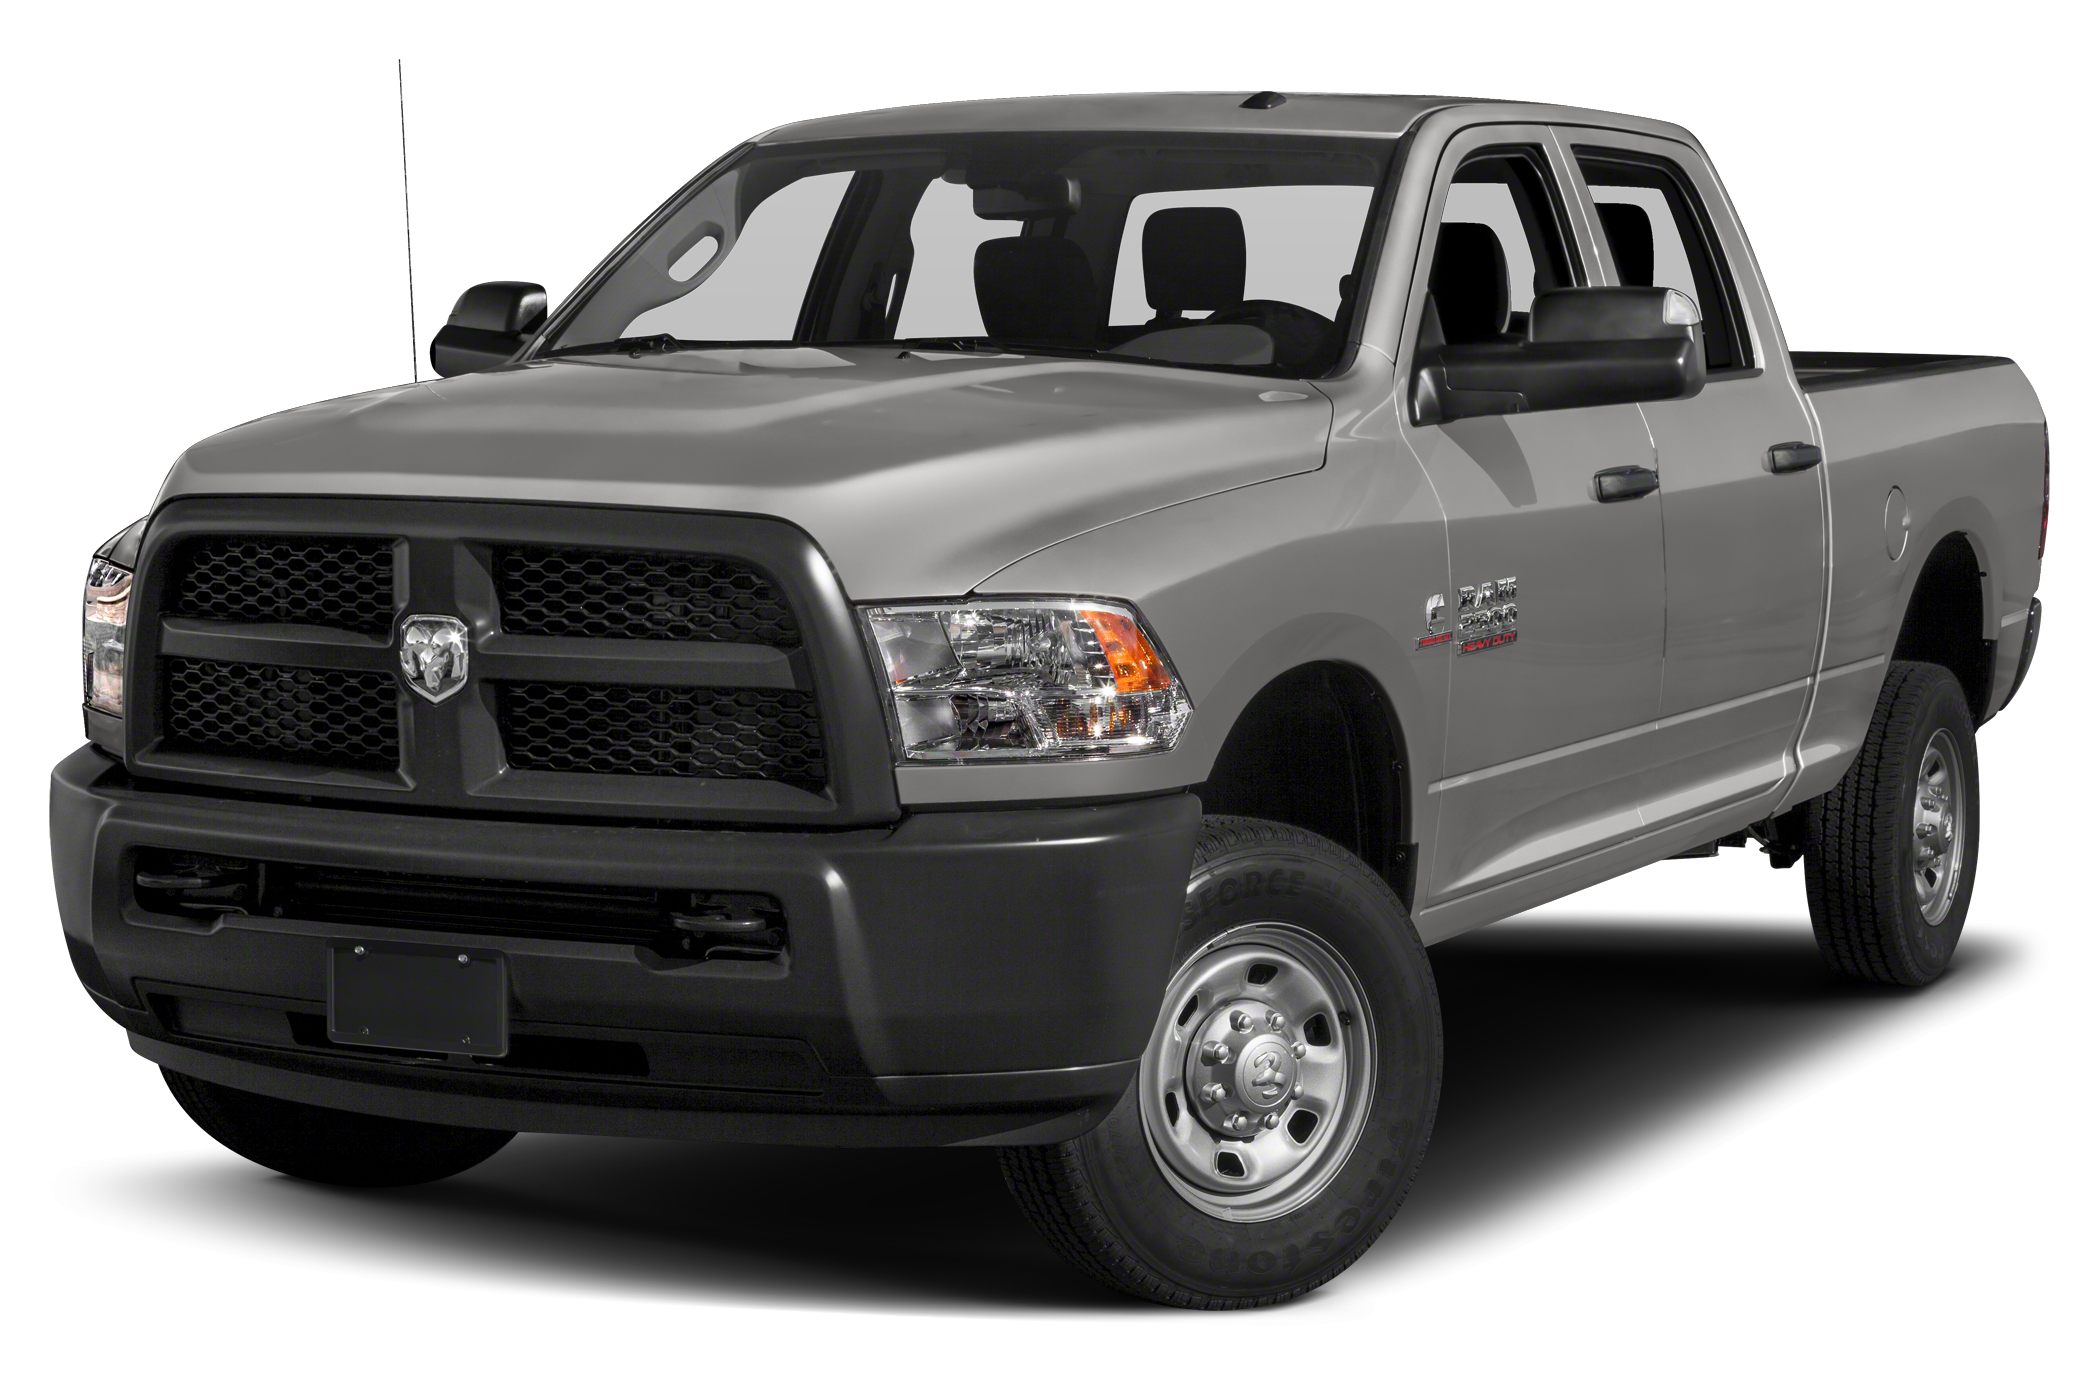 2014 Ram 2500 Tradesman 4x4 Crew Cab 169 In Wb Pictures